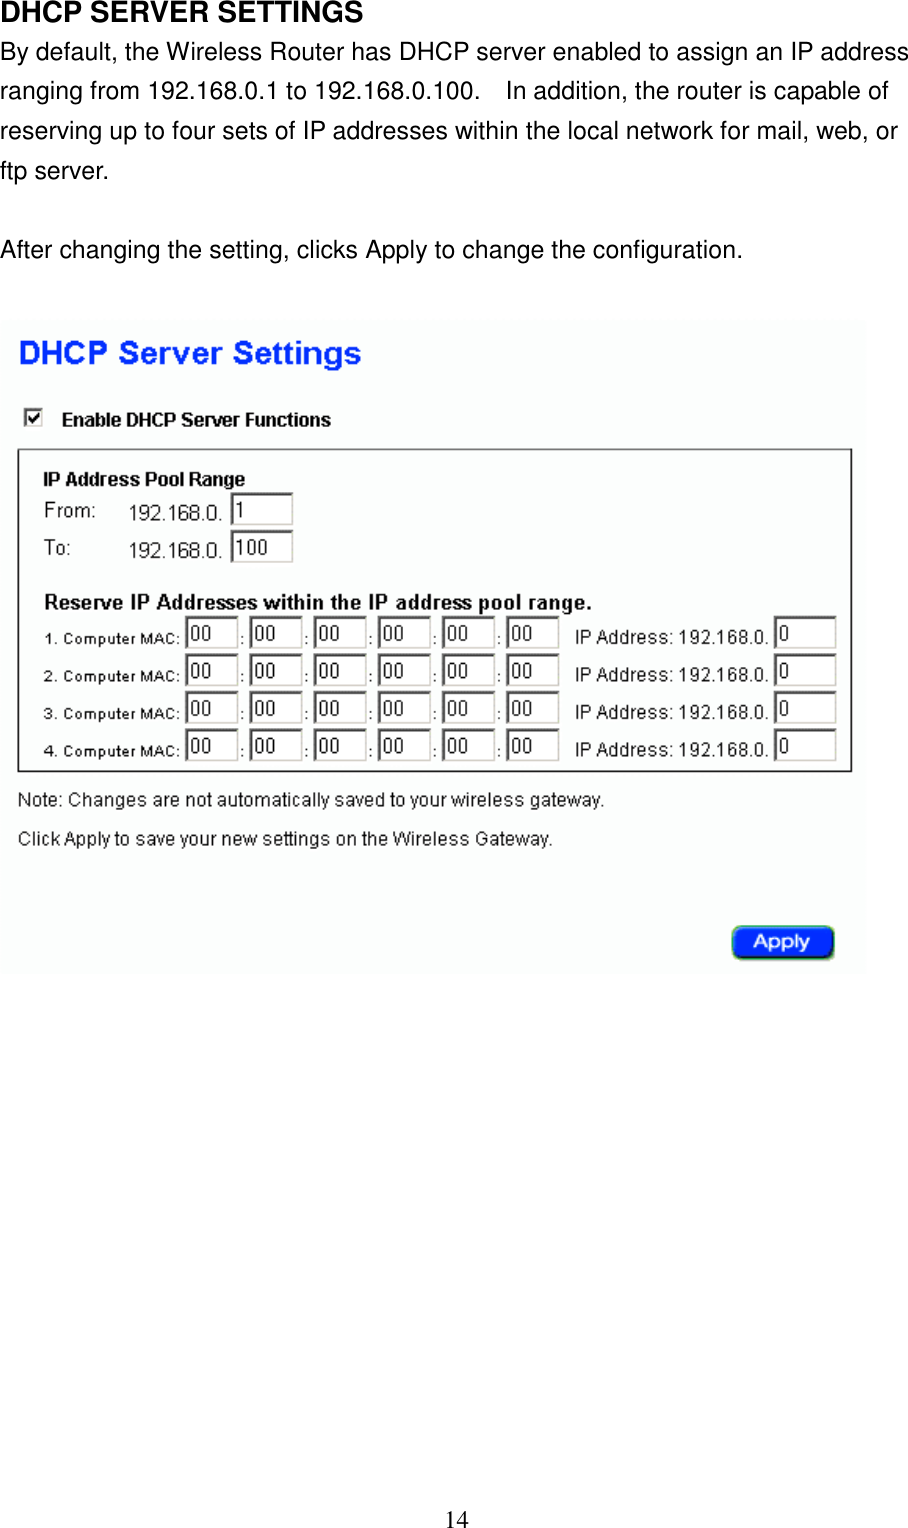 14DHCP SERVER SETTINGSBy default, the Wireless Router has DHCP server enabled to assign an IP addressranging from 192.168.0.1 to 192.168.0.100.    In addition, the router is capable ofreserving up to four sets of IP addresses within the local network for mail, web, orftp server.After changing the setting, clicks Apply to change the configuration.